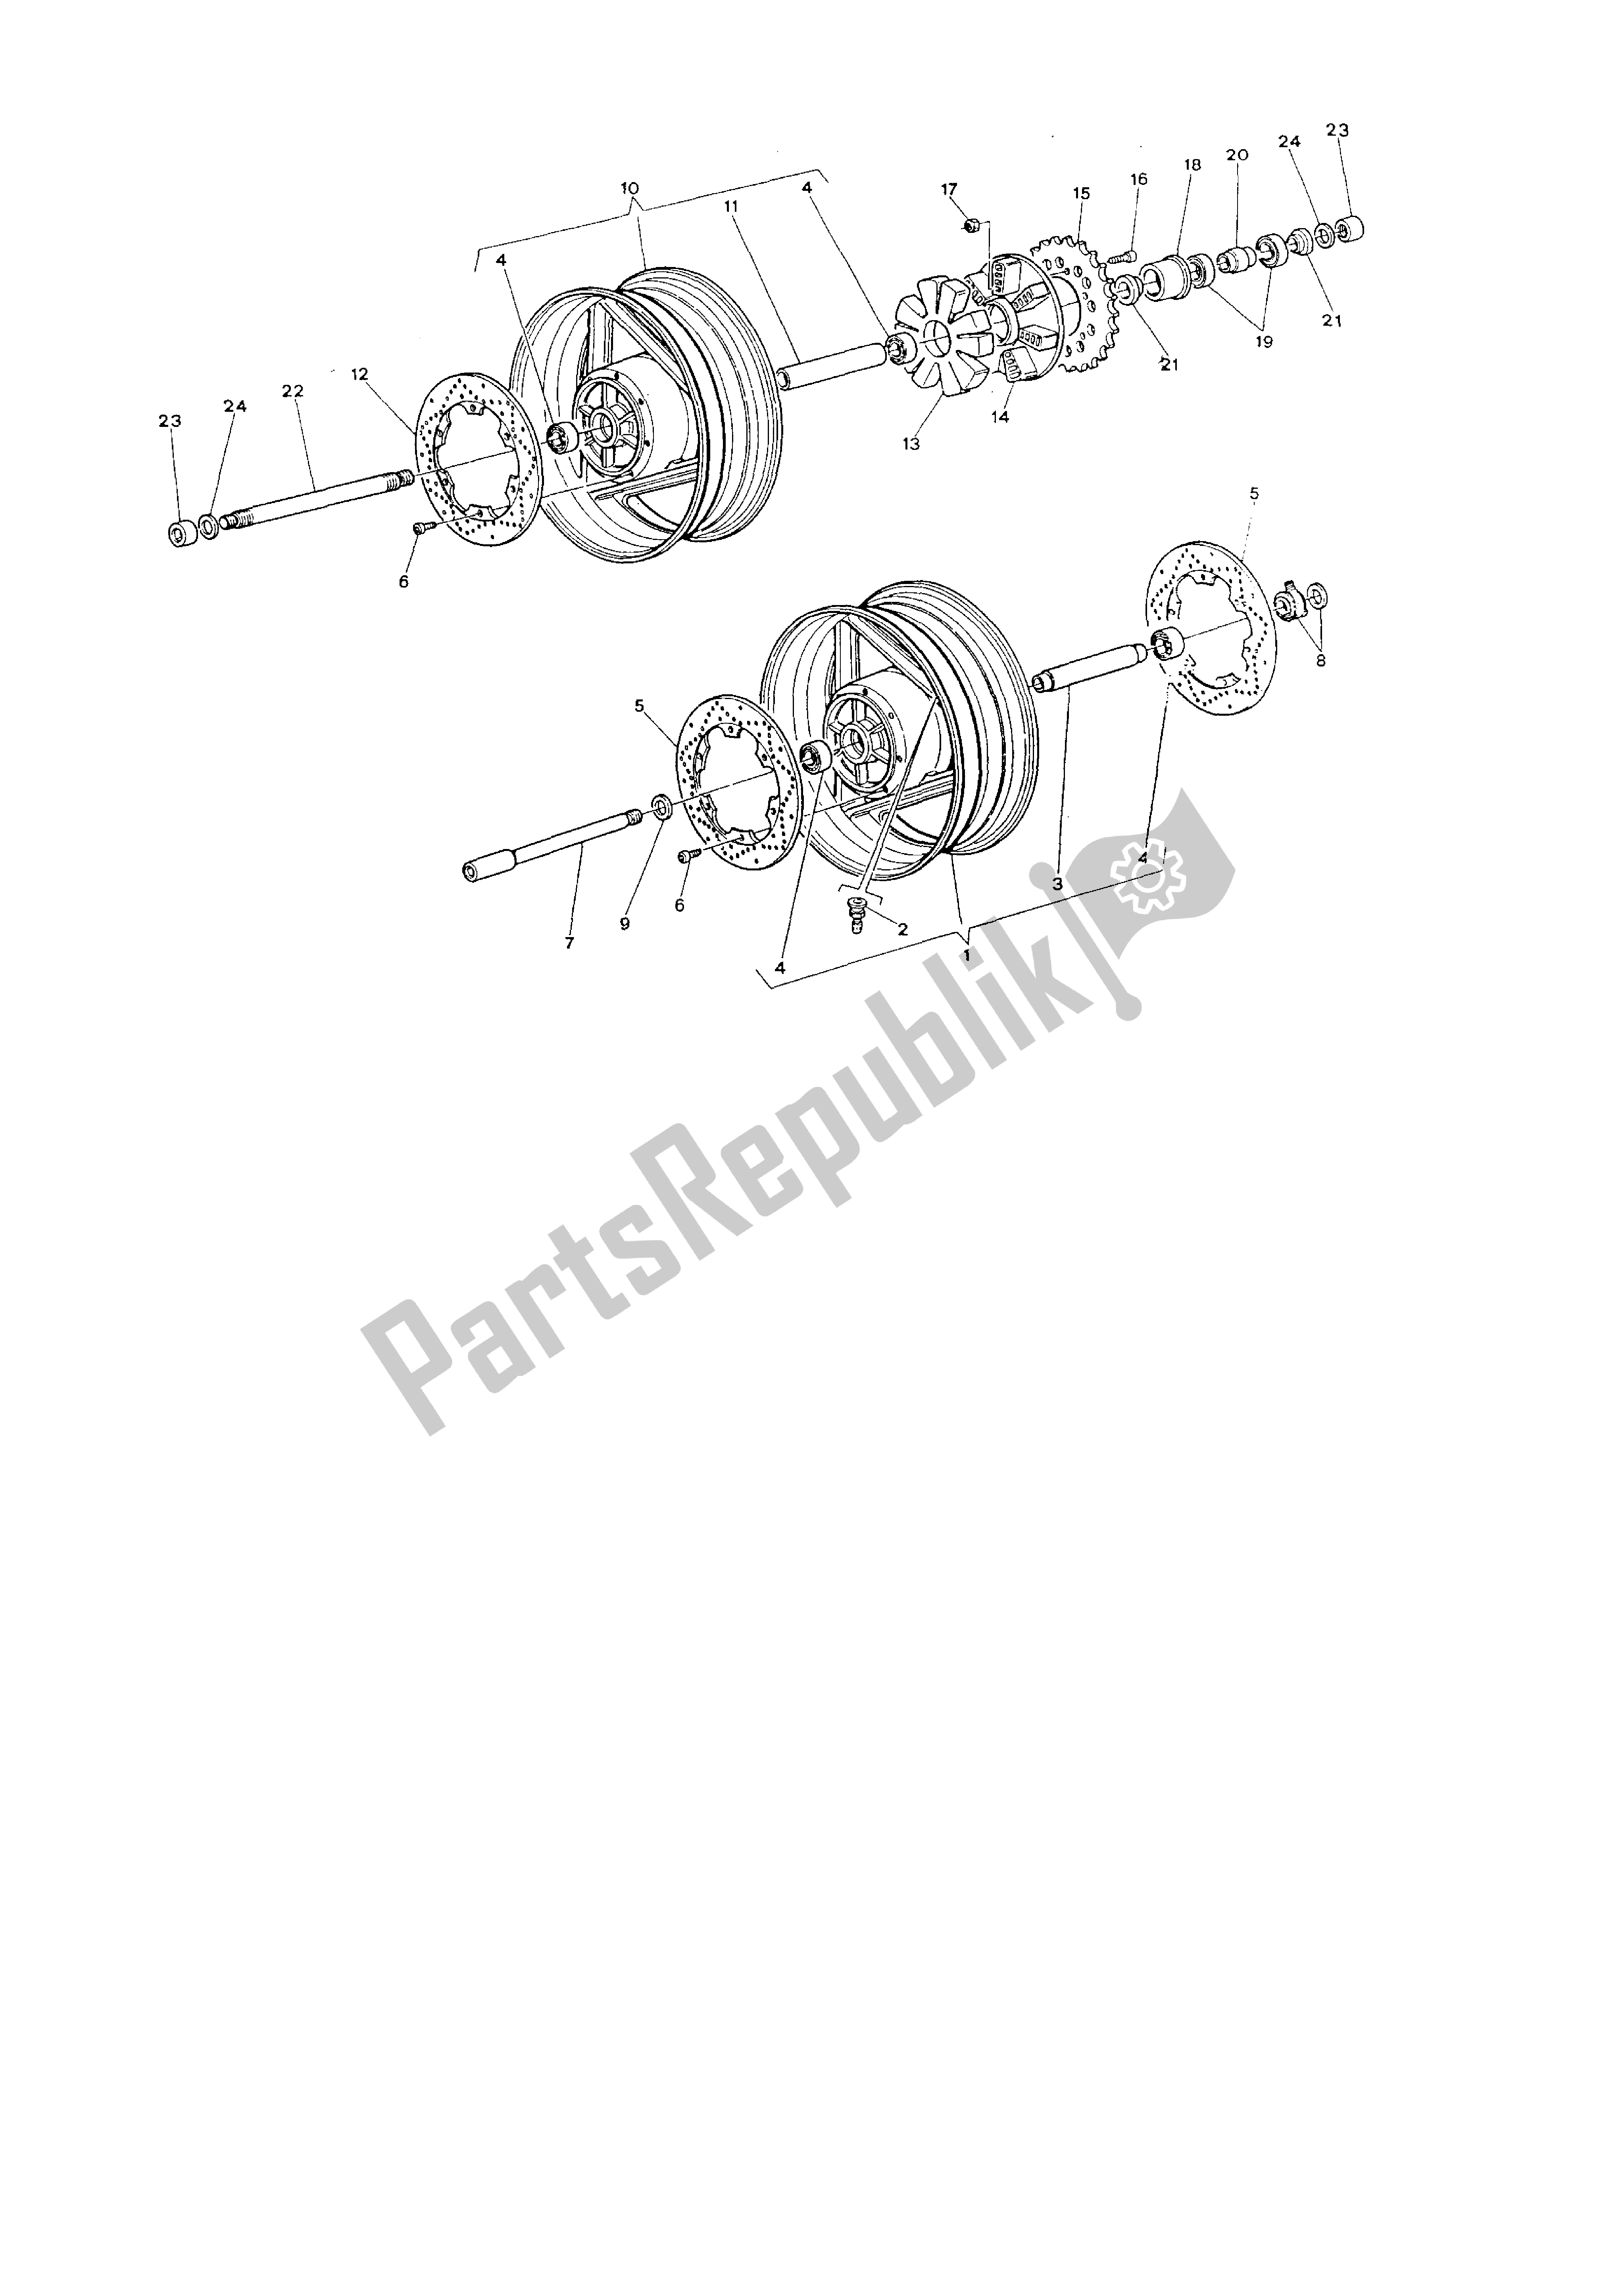 All parts for the Front And Rear Wheels ? Of the Ducati Paso 750 1986 - 1988